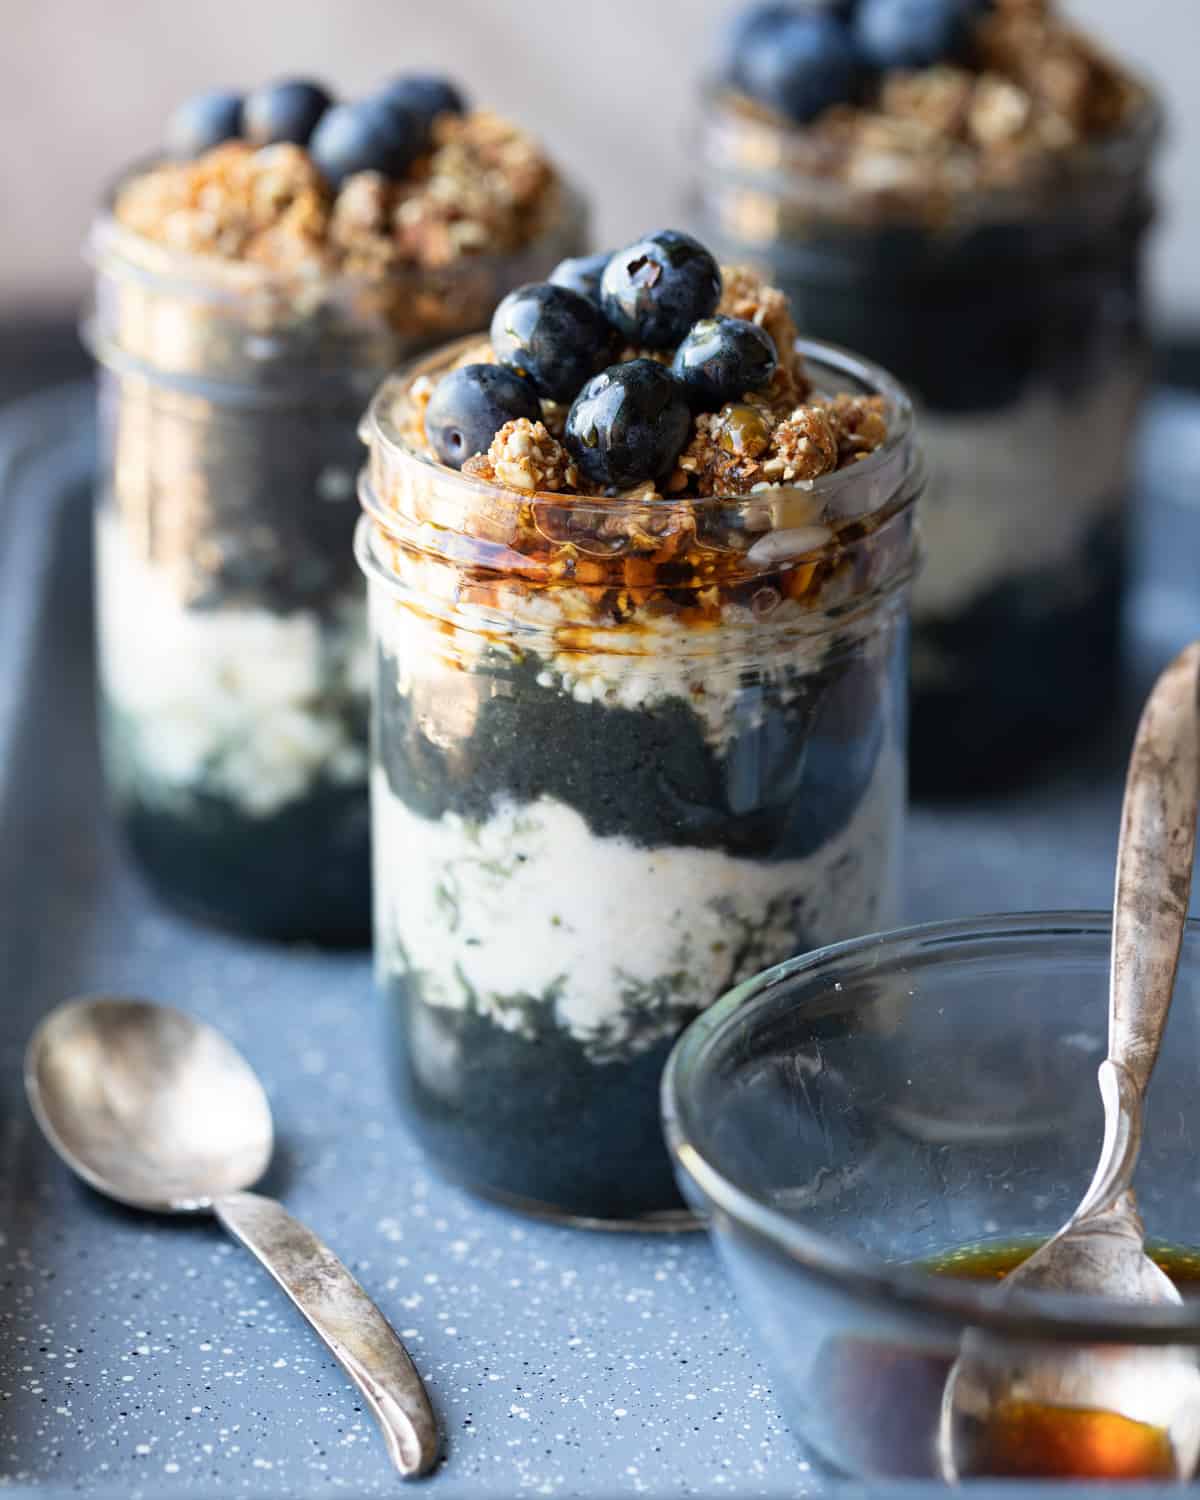 Close up image of a mason jars with layers of a high protein smoothie and overnight oats topped with fresh granola and blueberries. There are 2 more high protein overnight at parfaits in the background and a bowl of maple syrup in the foreground.